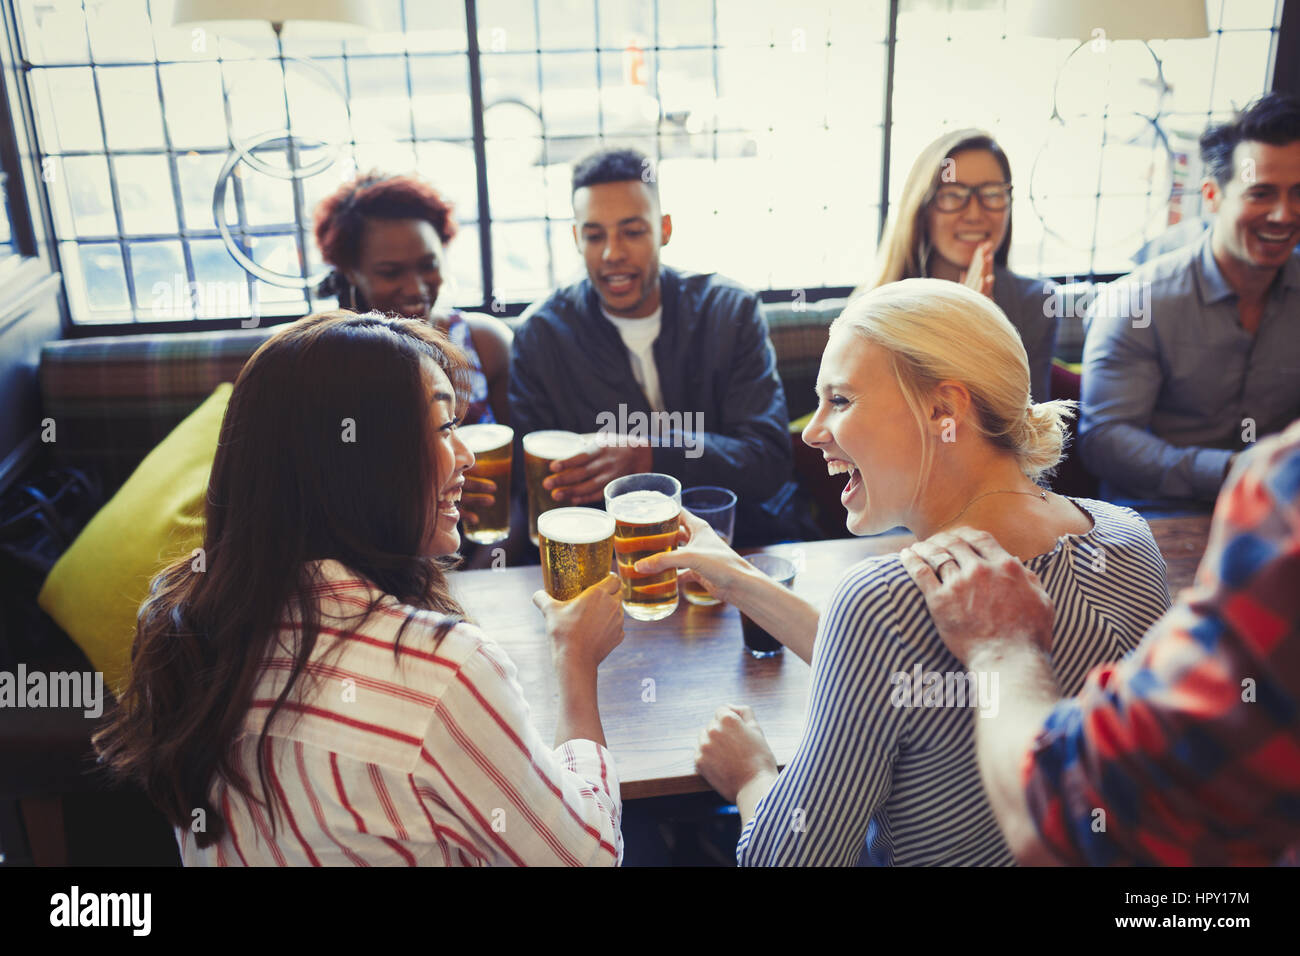 Laughing friends toasting beer glasses at table in bar Stock Photo